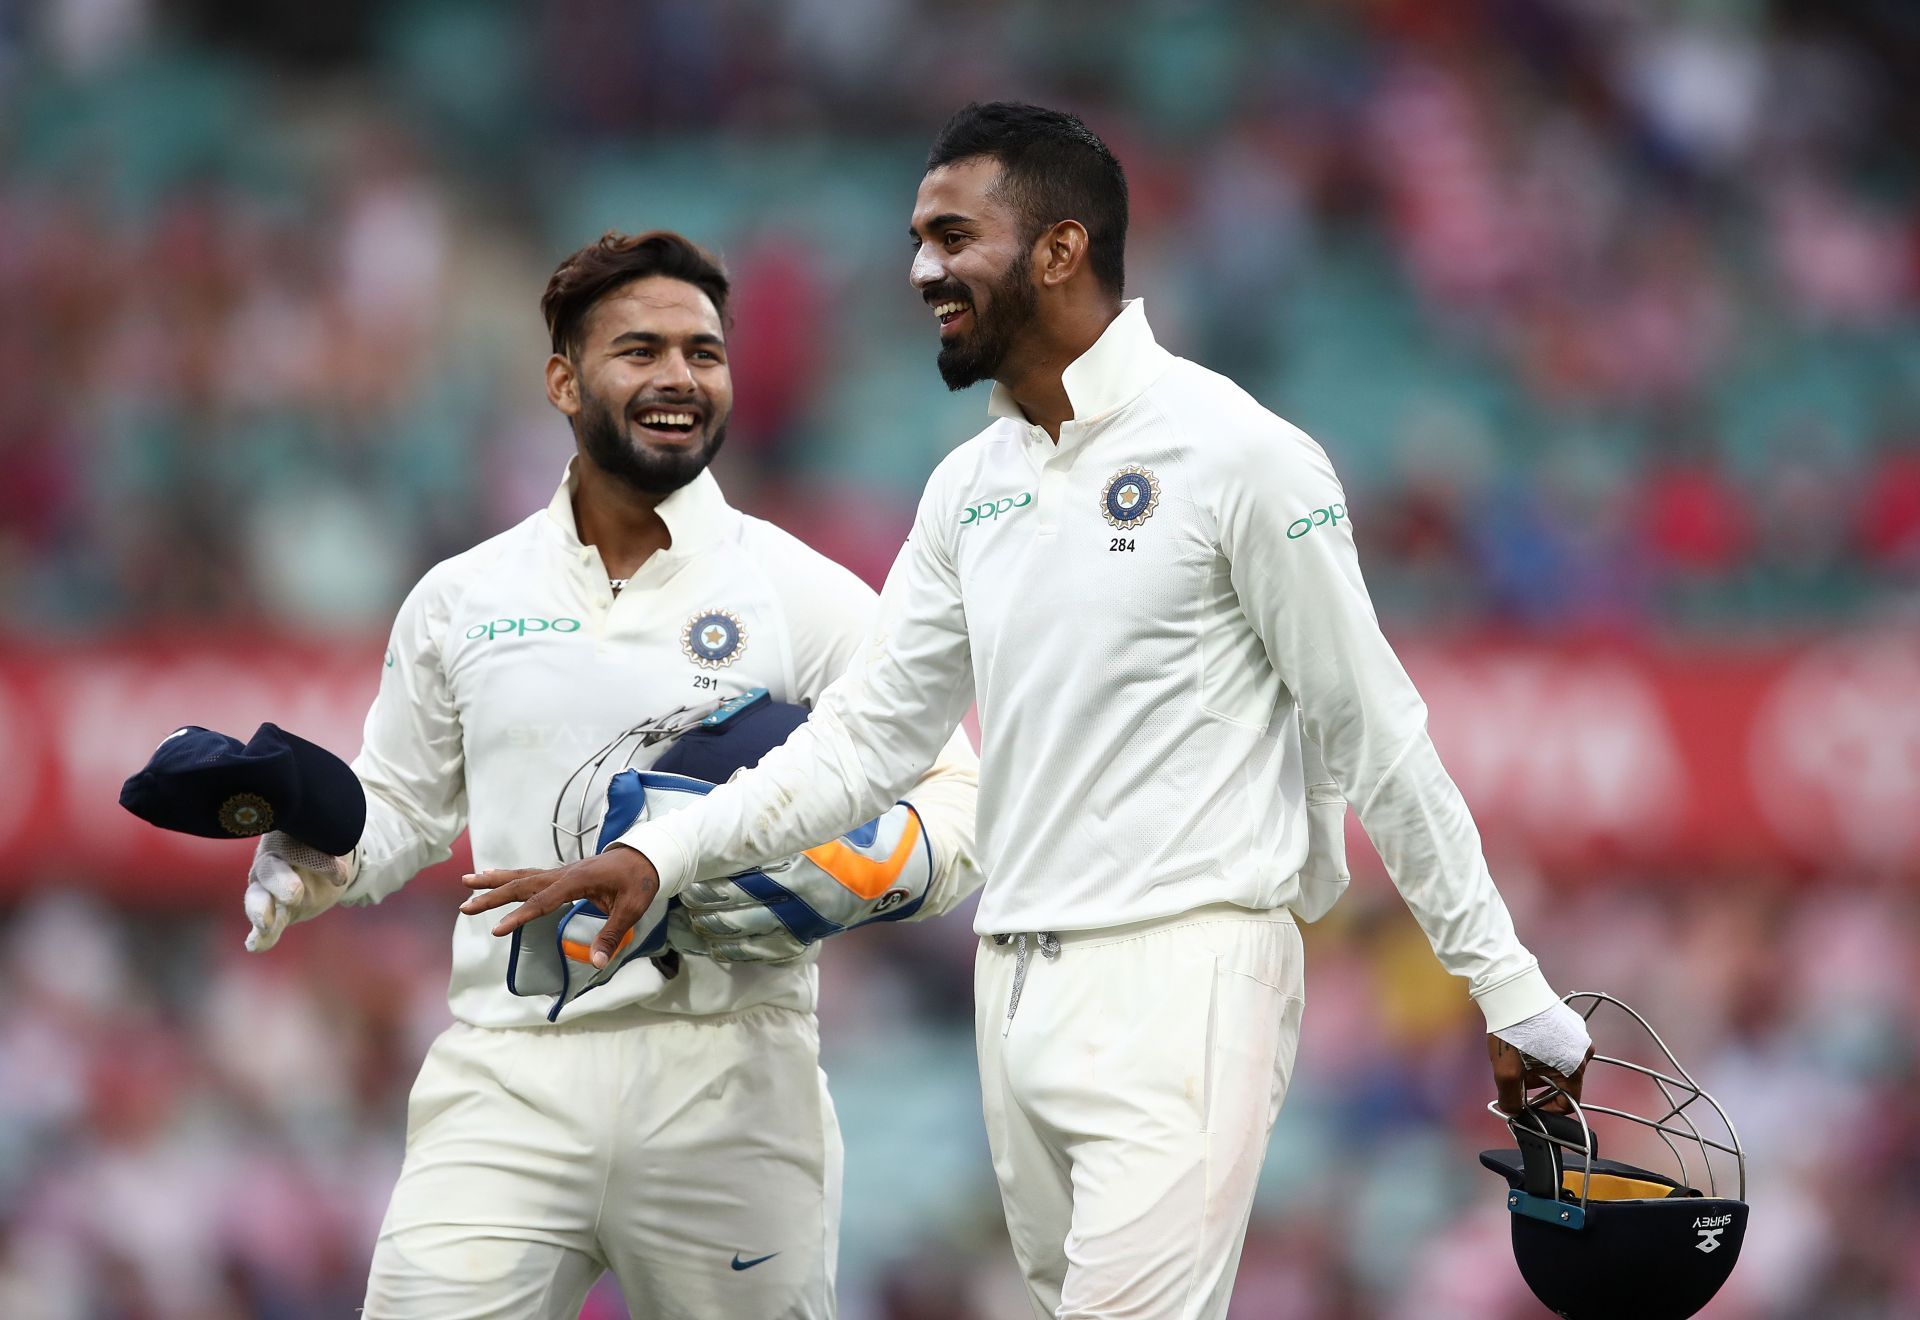 Pant has to give room to different voices of opinion